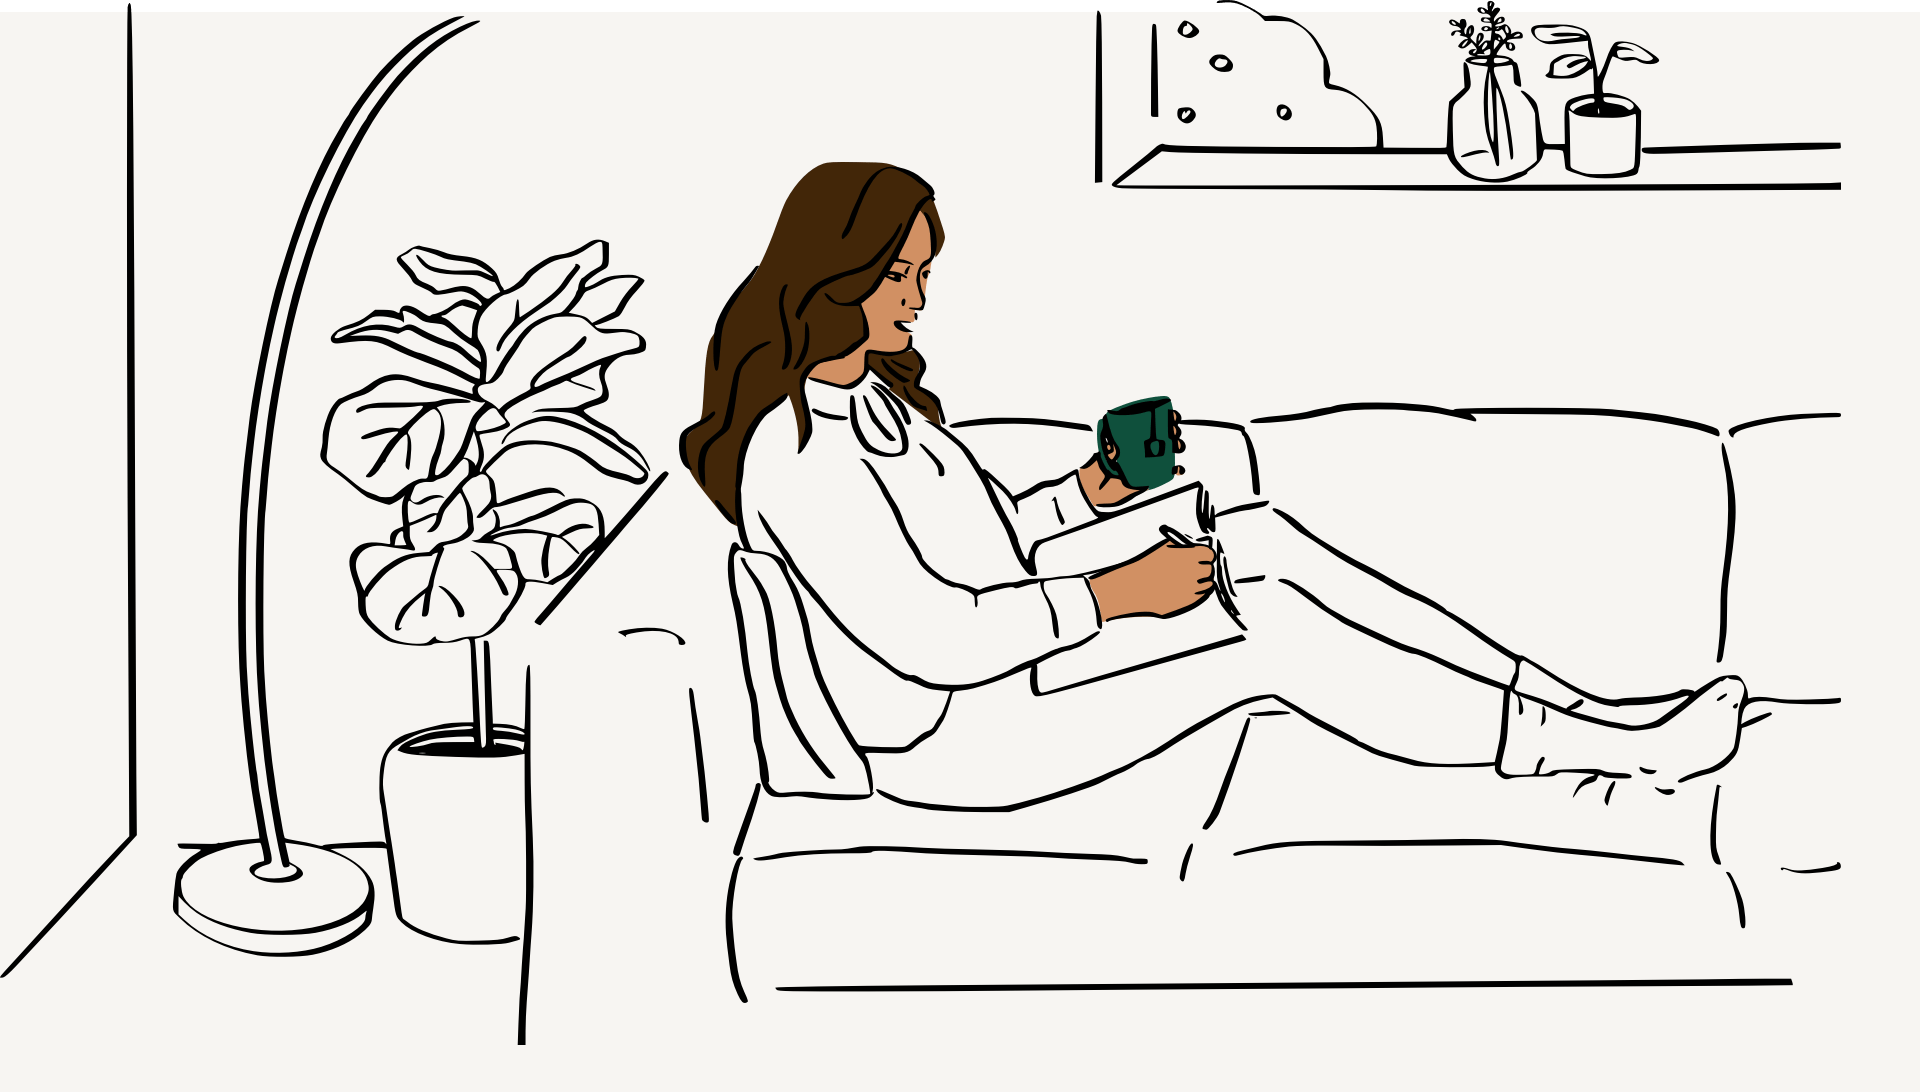 An illustration of a woman sitting on a couch, holding a mug and writing in a journal